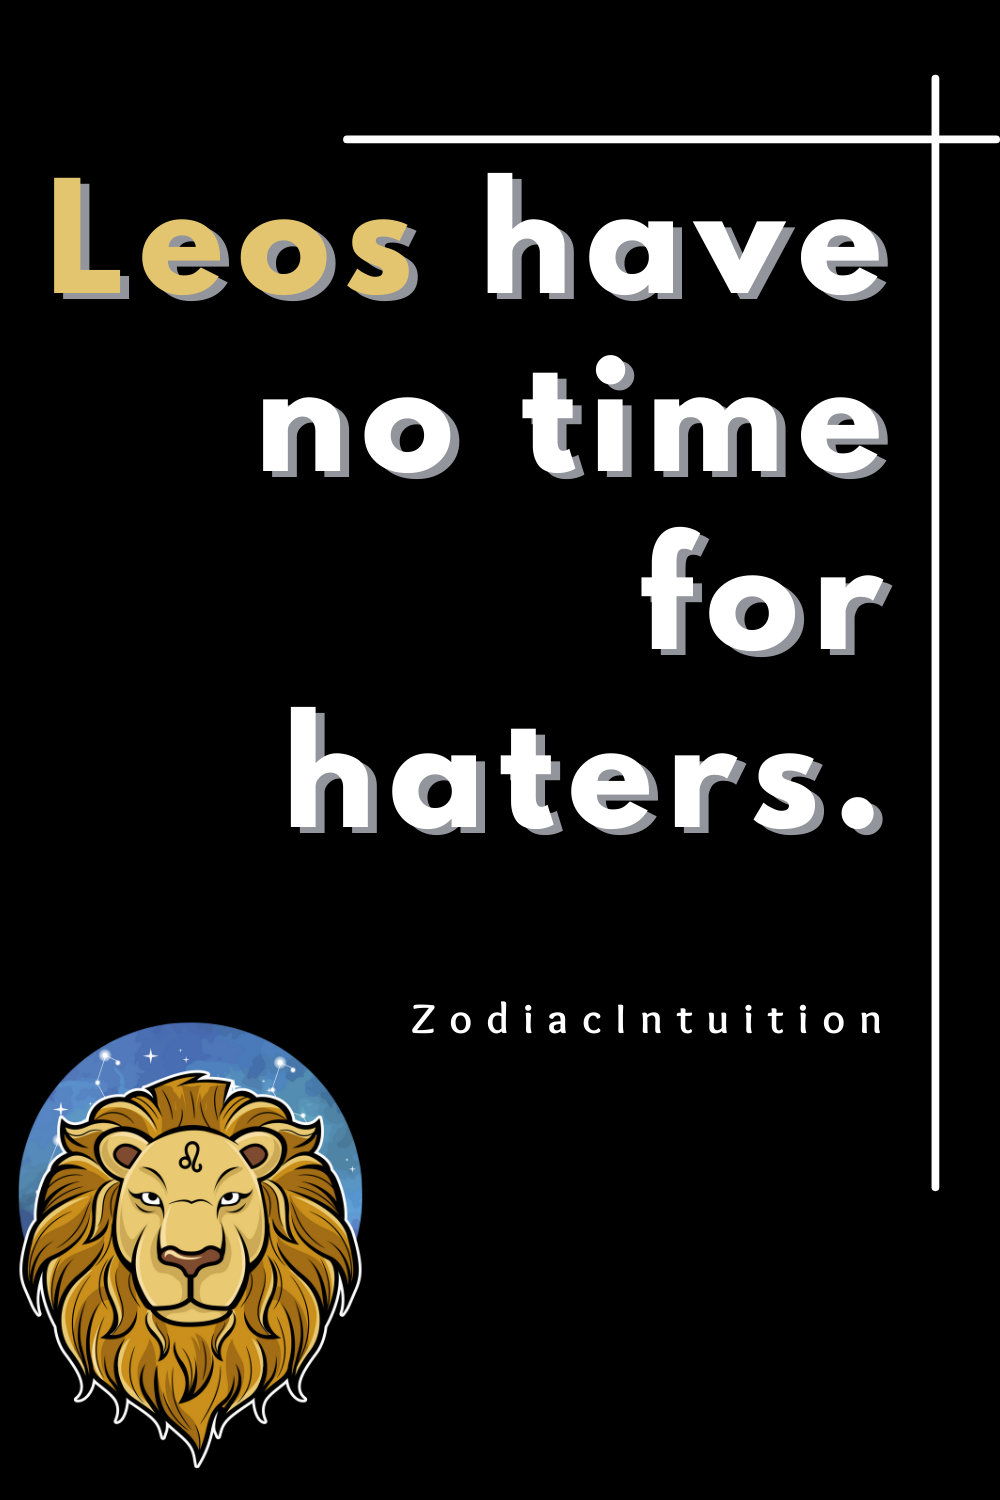 Leo Zodiac Sign Unleashed: 10 Quotes Igniting Zodiac Fire!